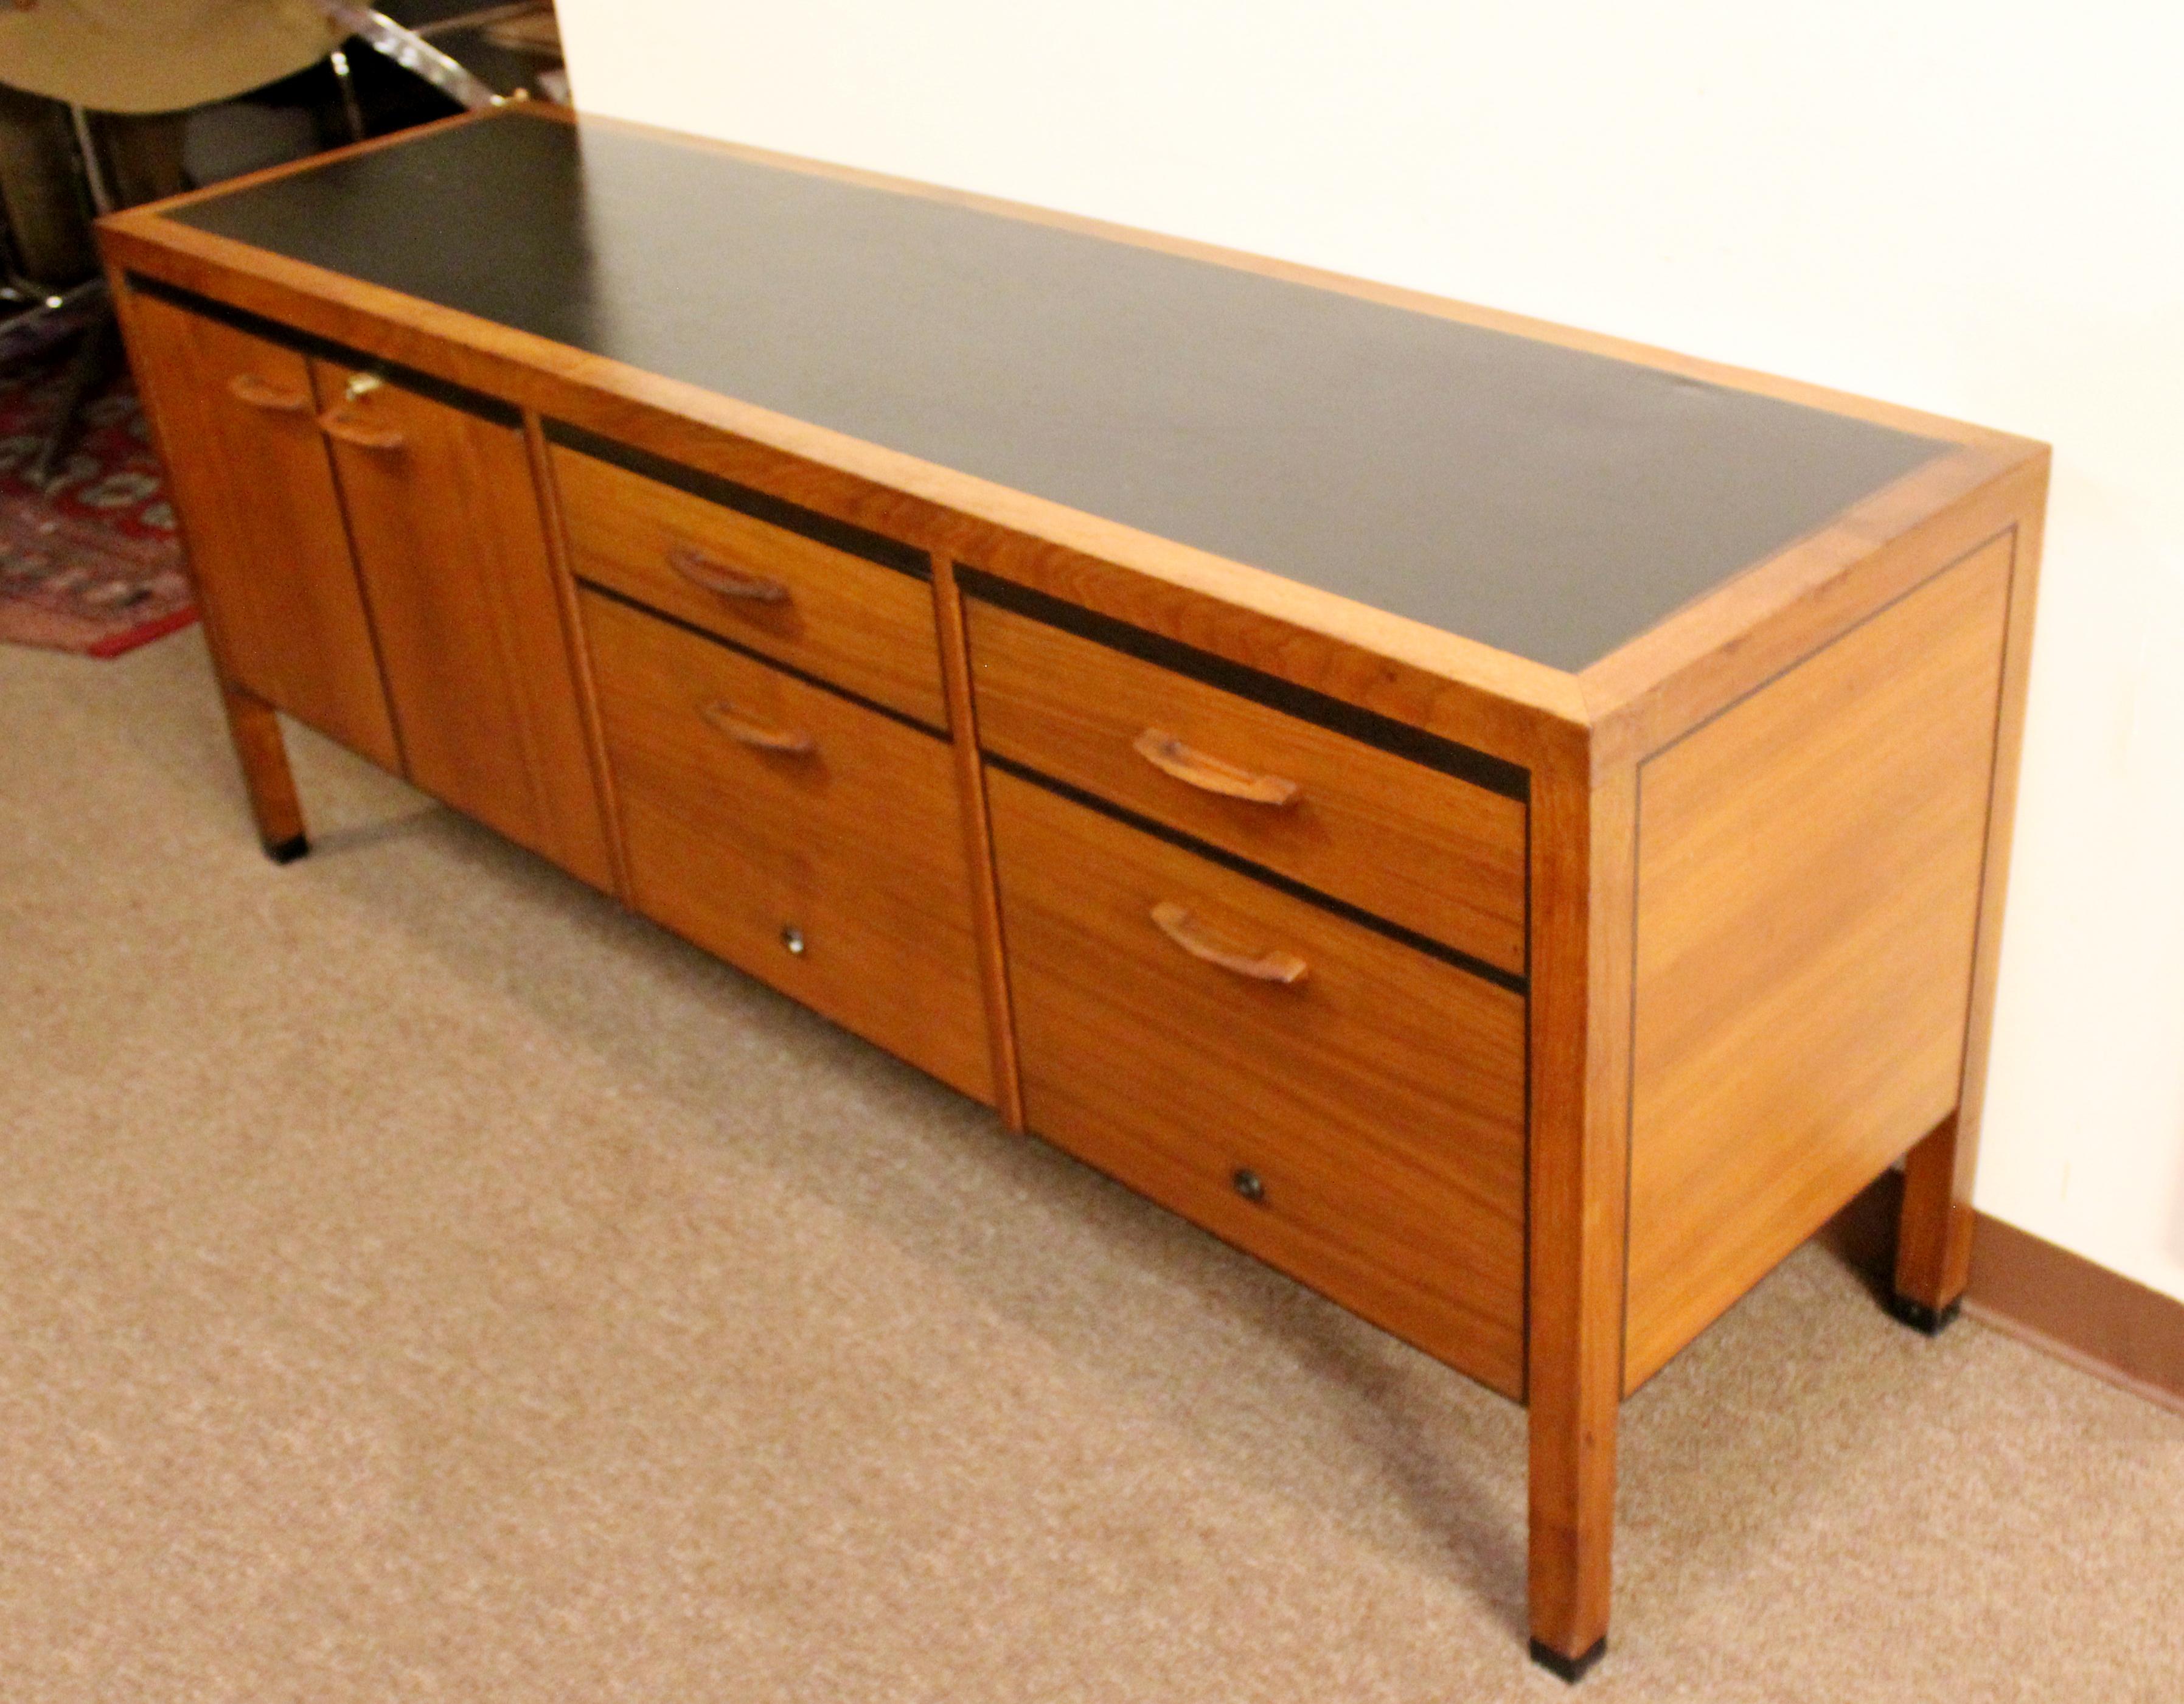 For your consideration is an excellent example of an executive credenza file cabinet, with four drawers, by Directional, circa the 1960s. In good vintage condition. The dimensions are 72